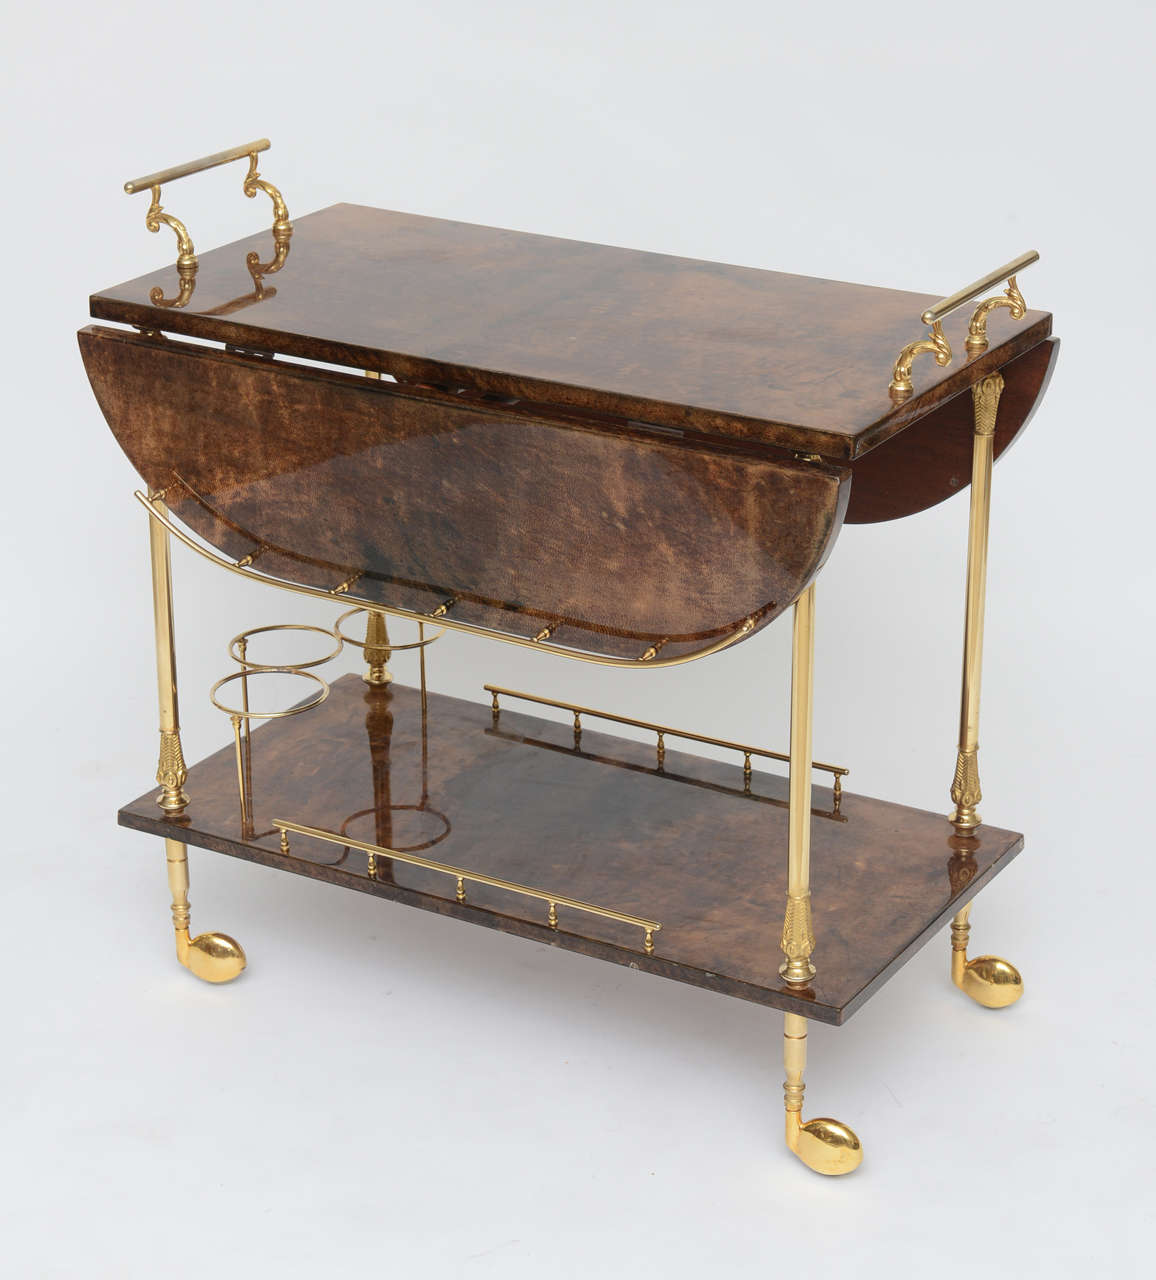 Handsome Tura parchment bar cart in exceptionally good original vintage condition. Brown lacquered goatskin with polished brass hardware. Depth expands from 16